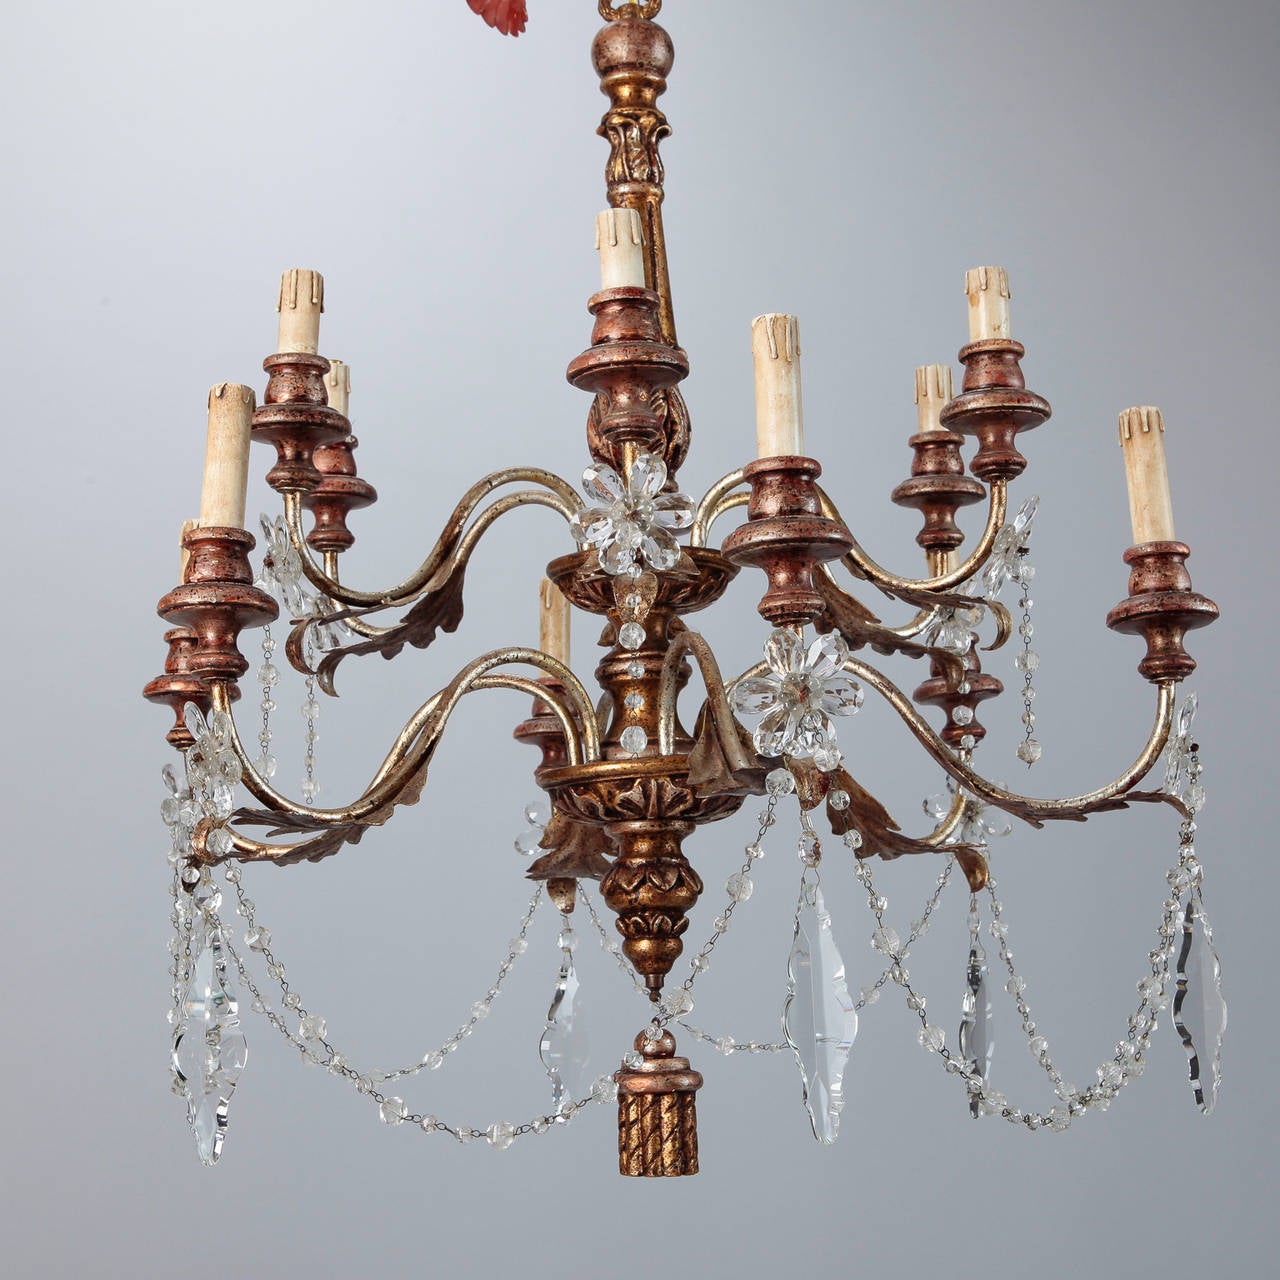 Carved 19th Century French Twelve-Light Gild Wood and Crystal Chandelier